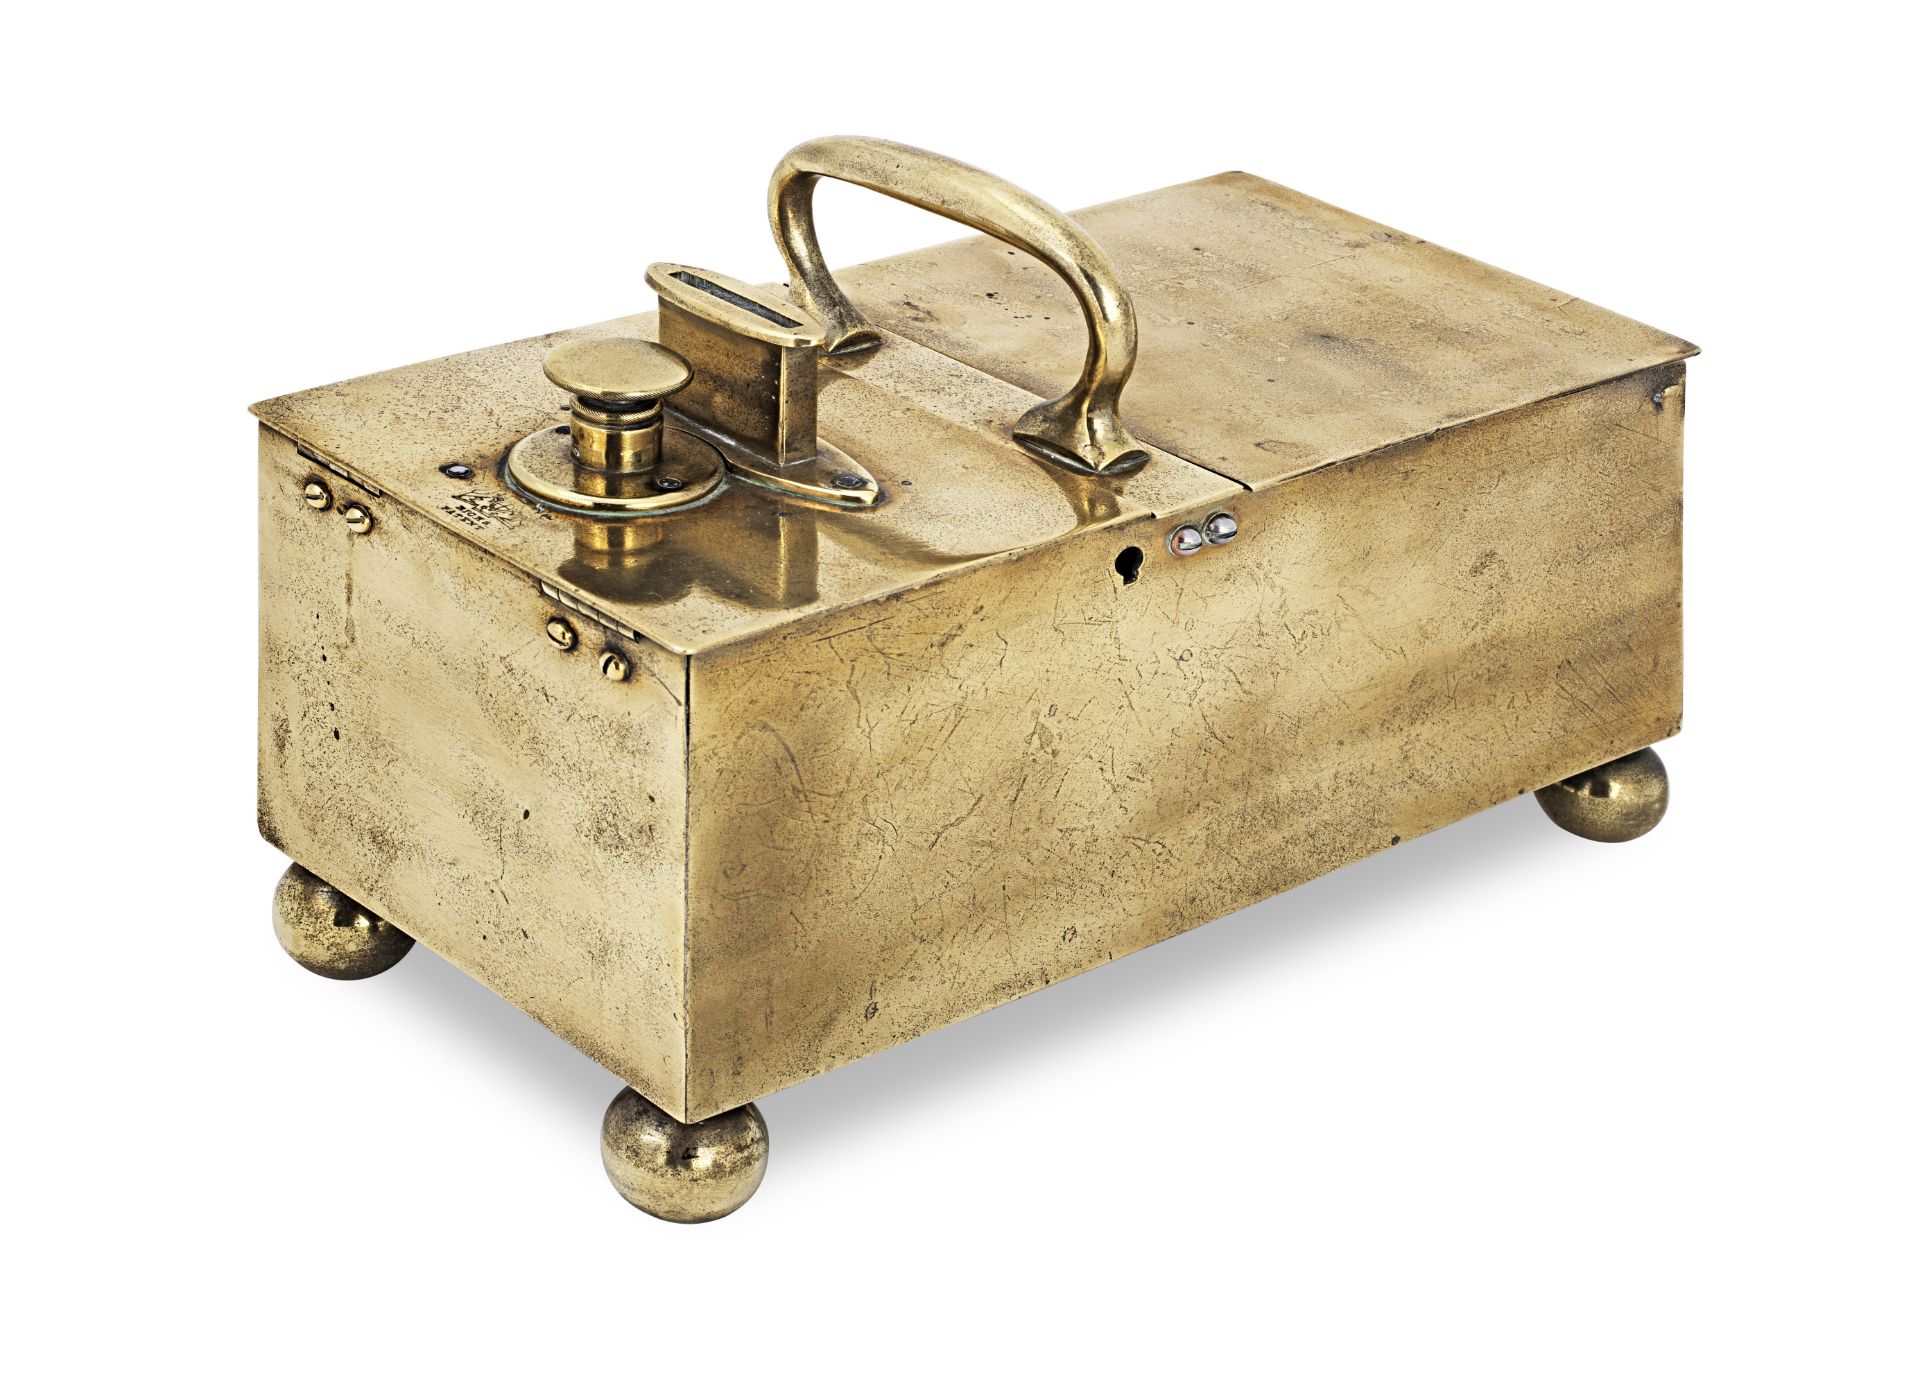 An early to mid-19th century brass 'honesty' tobacco box, marked 'Rich's Patent', probably made i...